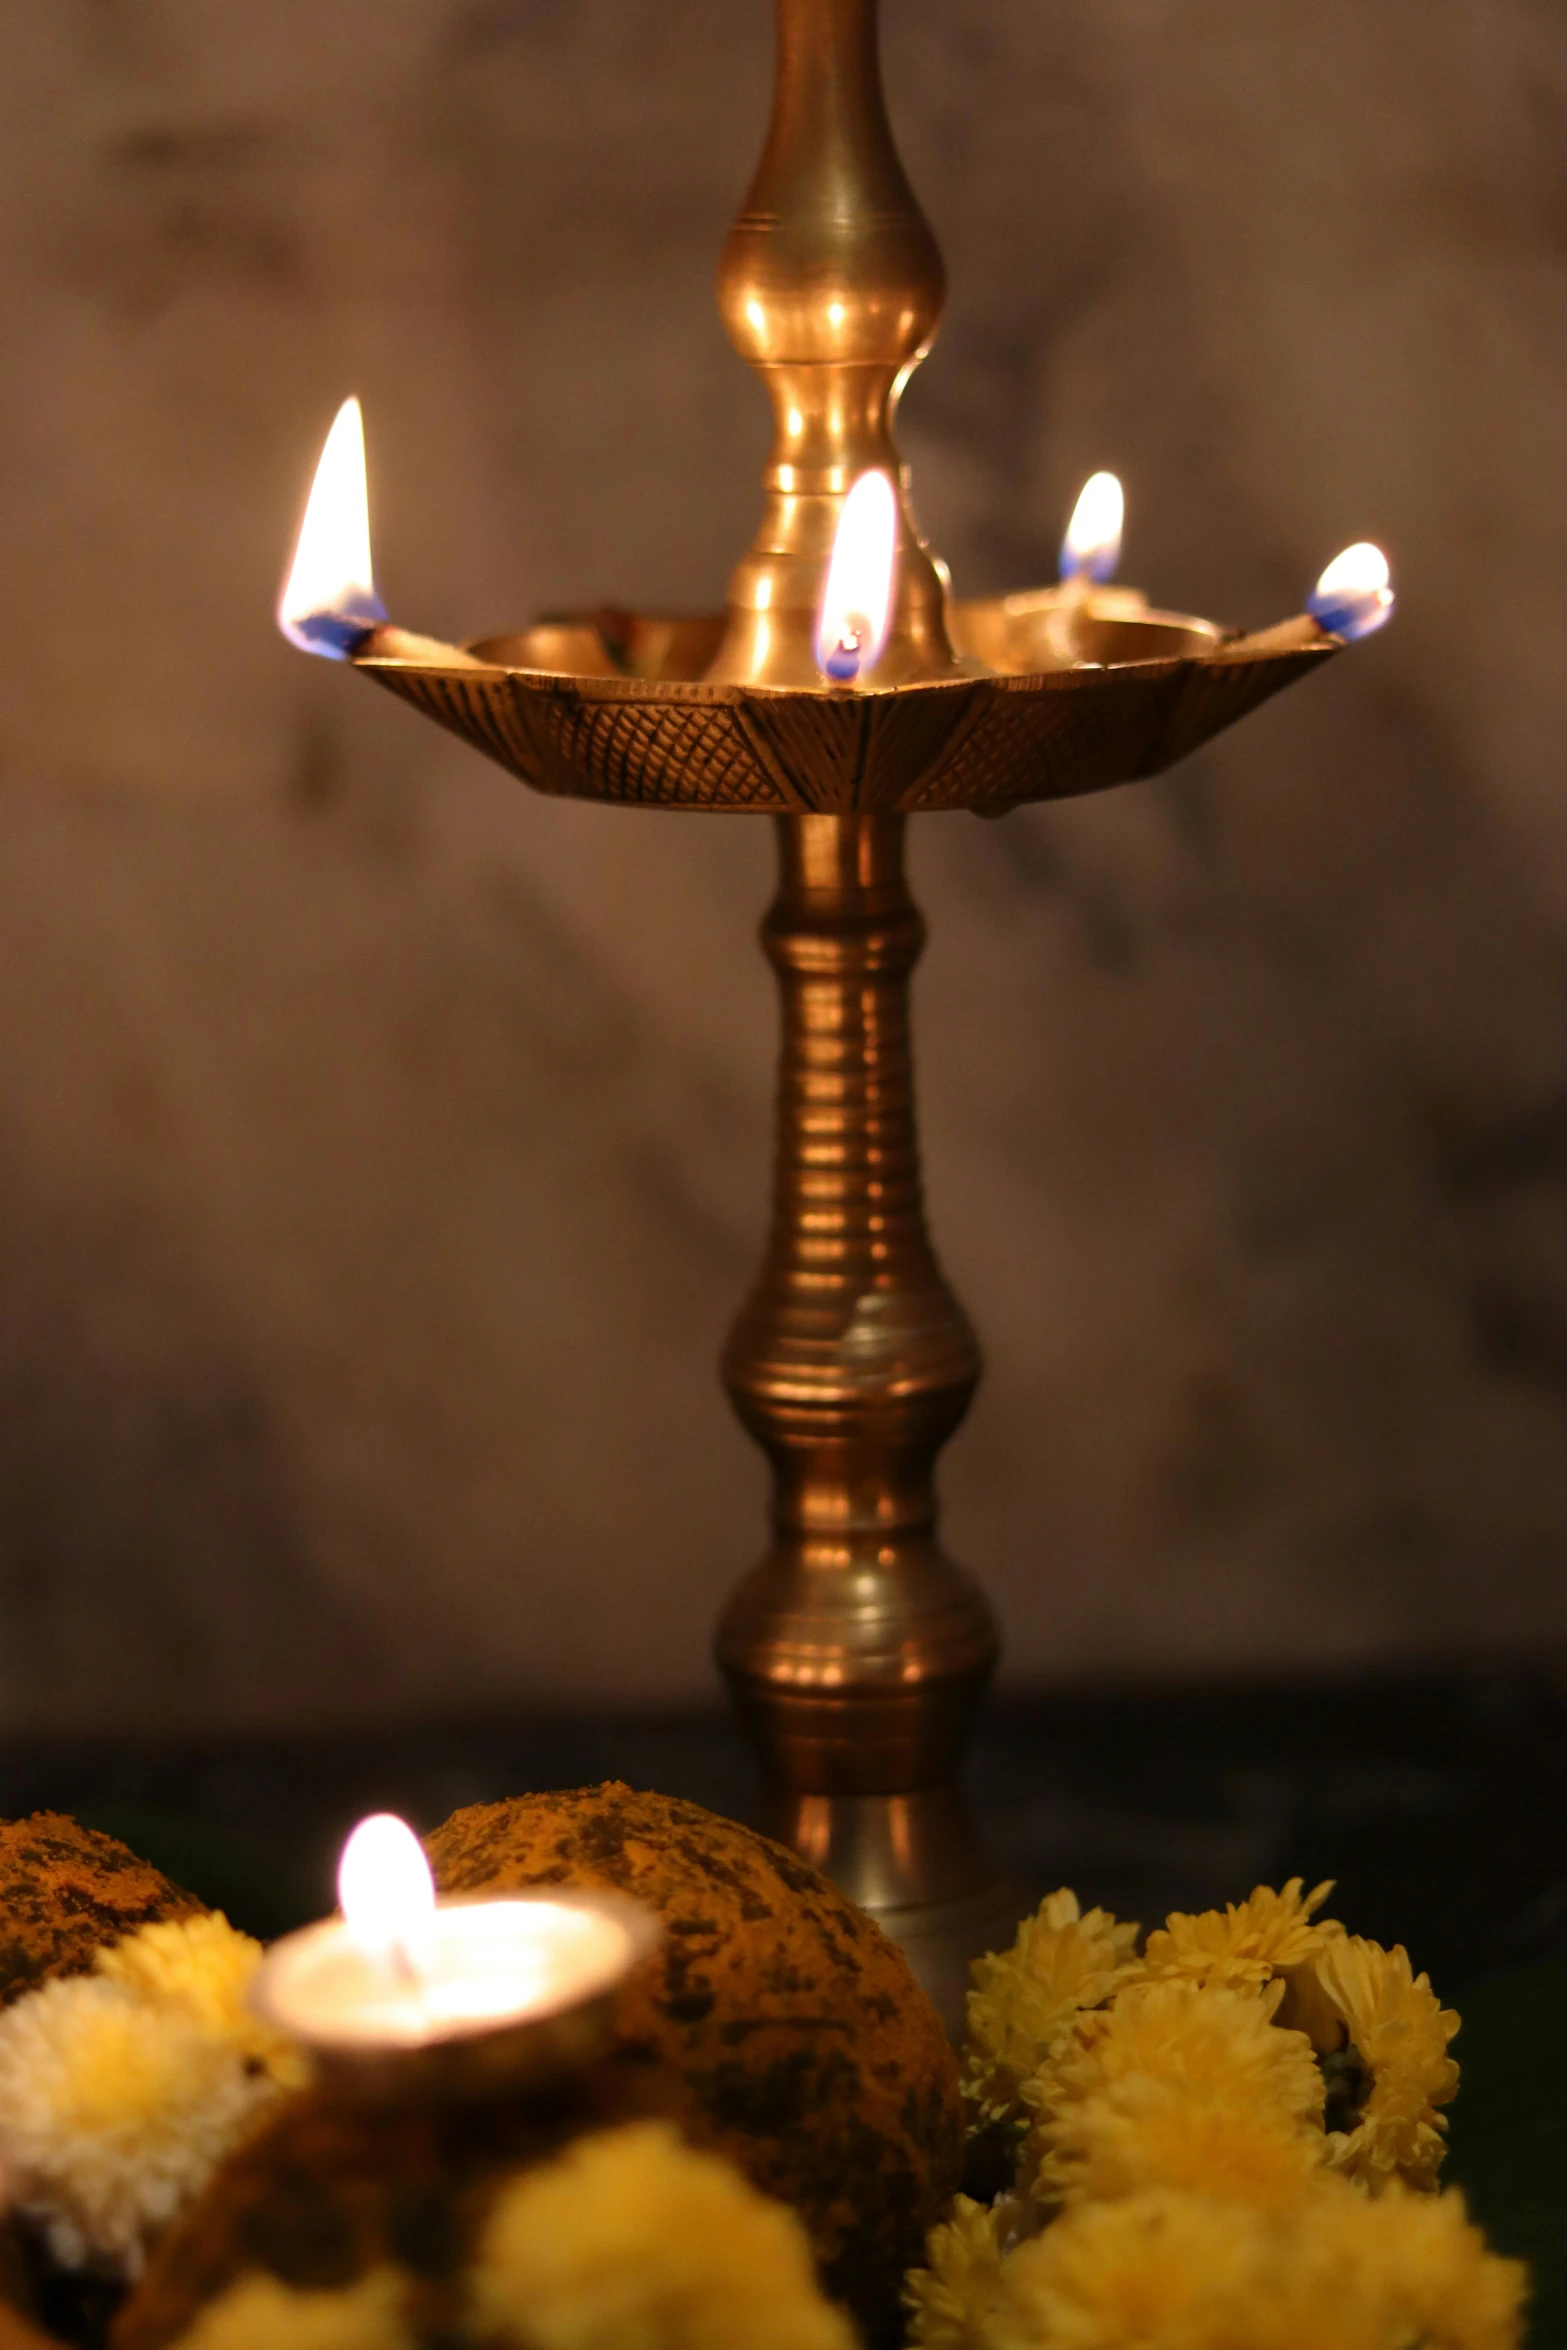 a group of candles sitting on top of a table, a still life, by Bholekar Srihari, hurufiyya, floor lamps, closeup - view, traditional medium, copper